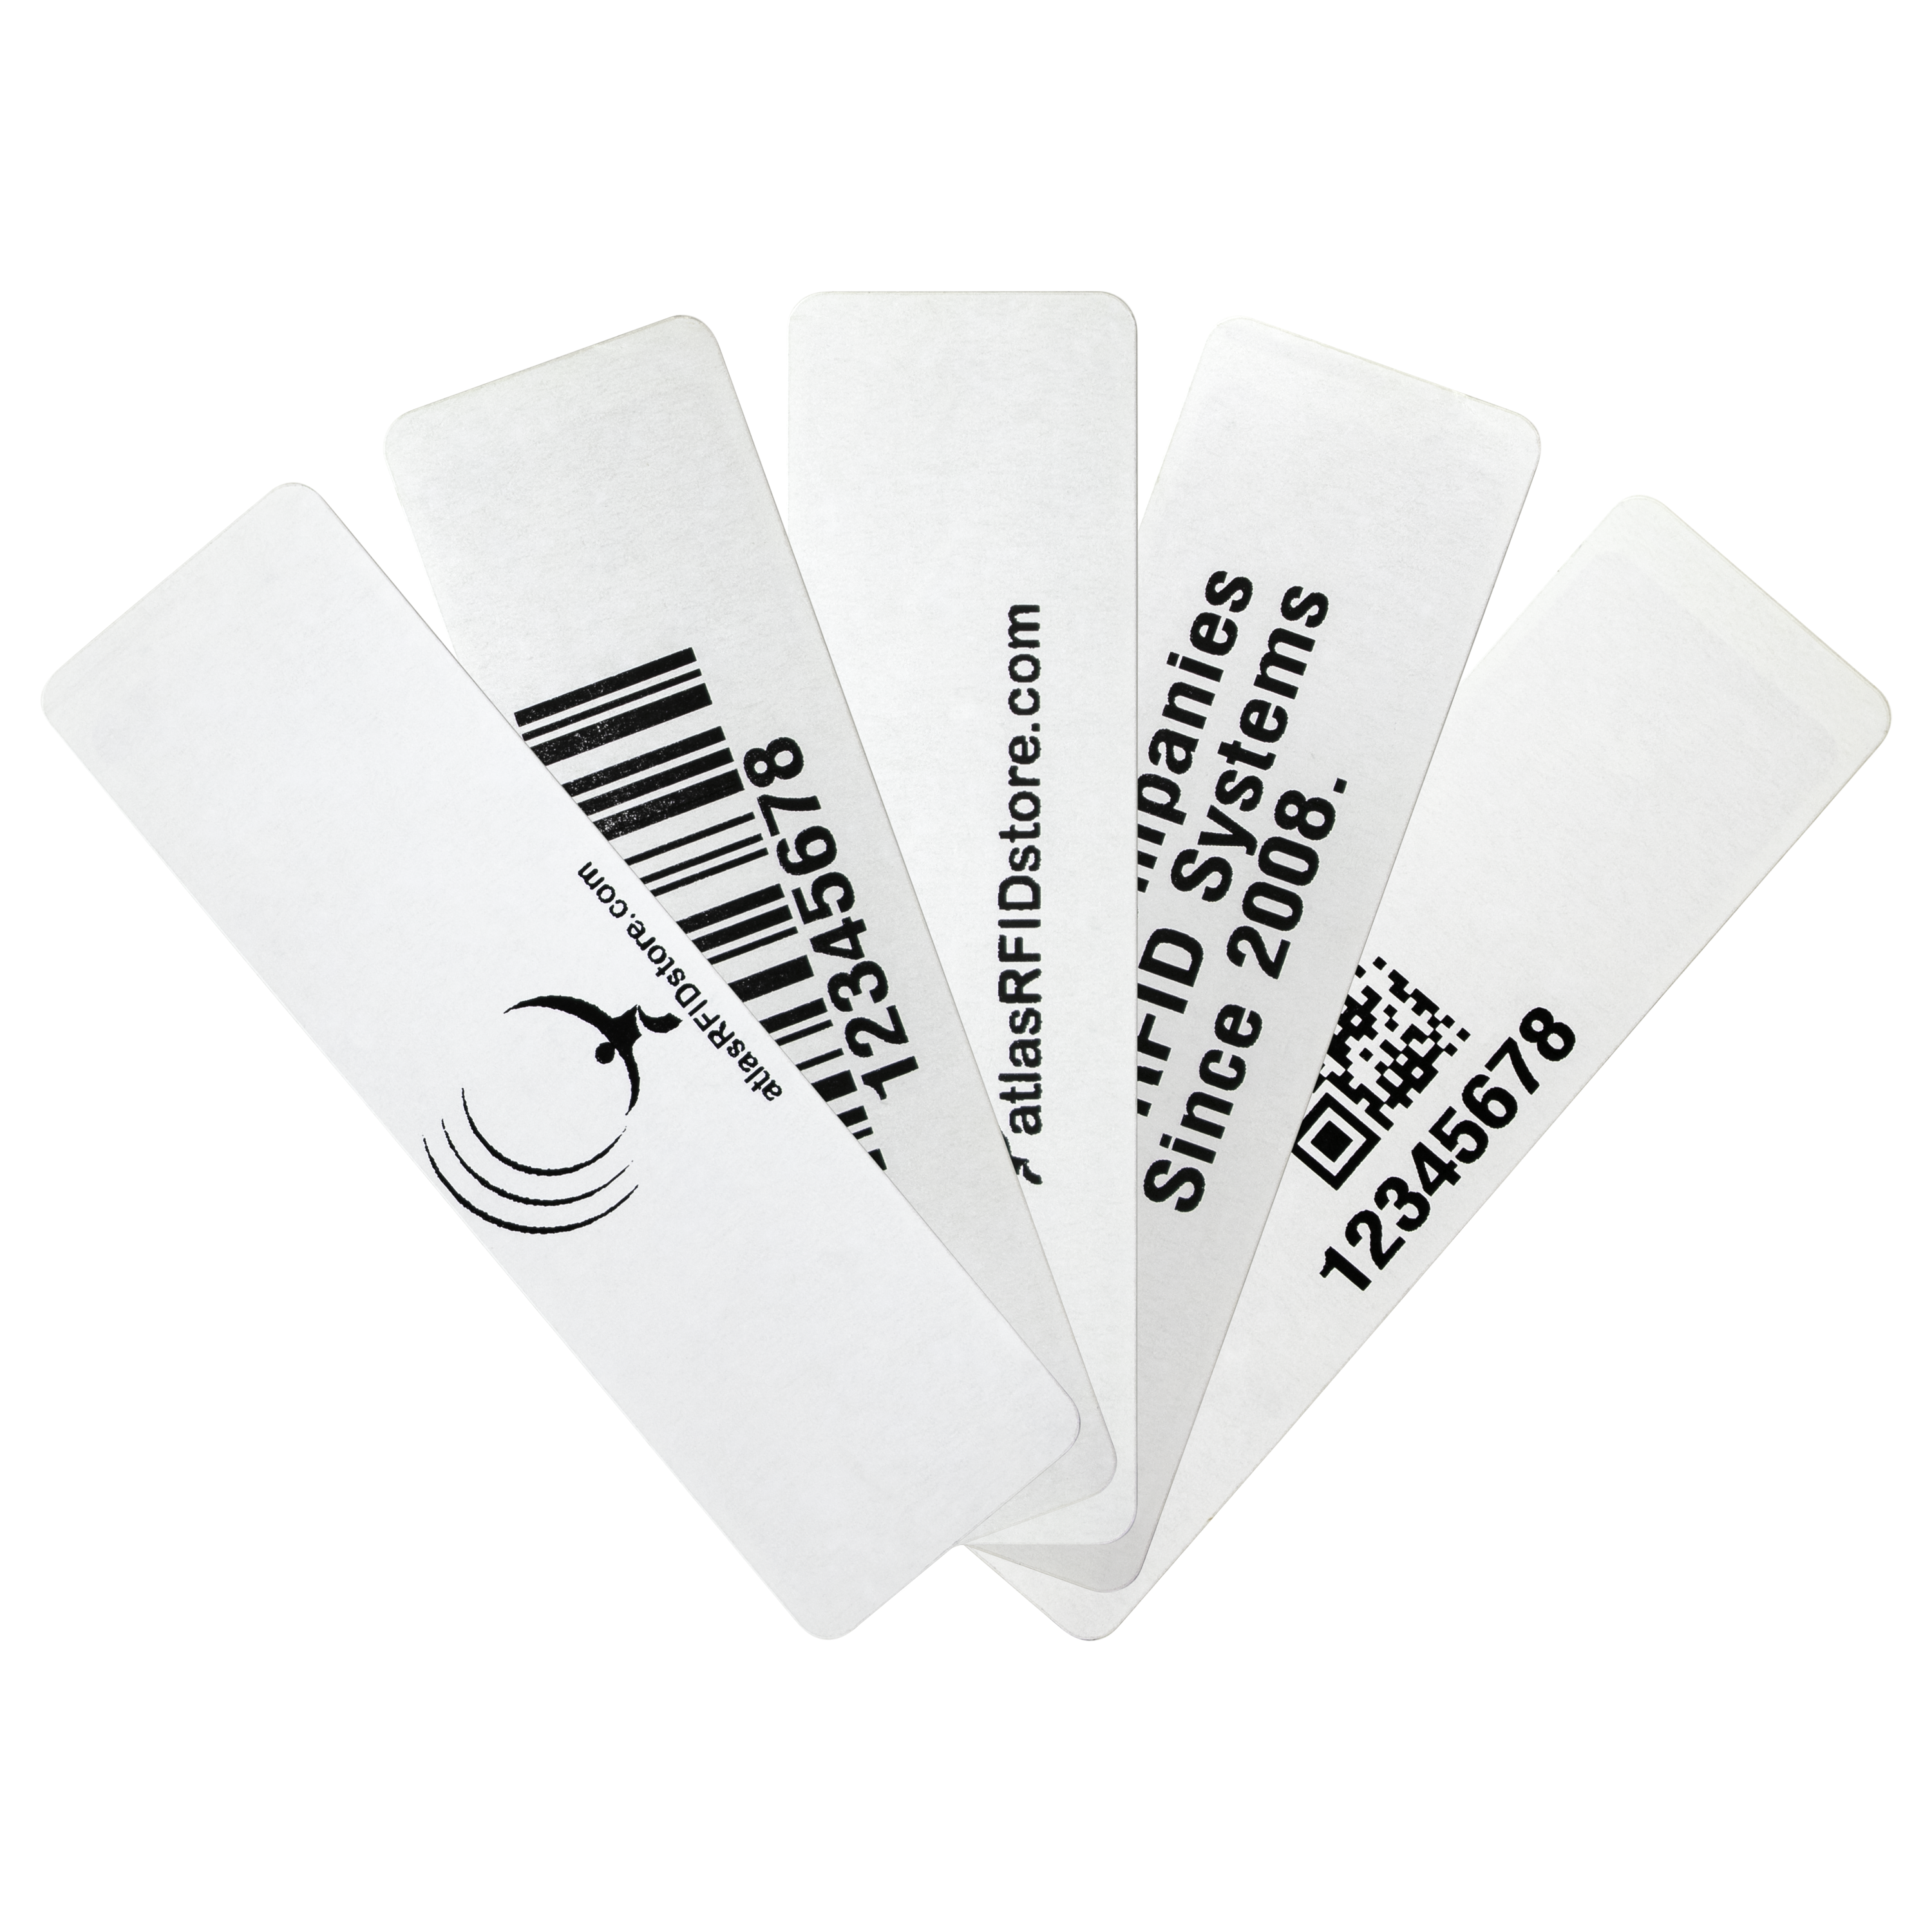 RFID Encoding & Printing: What Can You Put on RFID Tags? - atlasRFIDstore